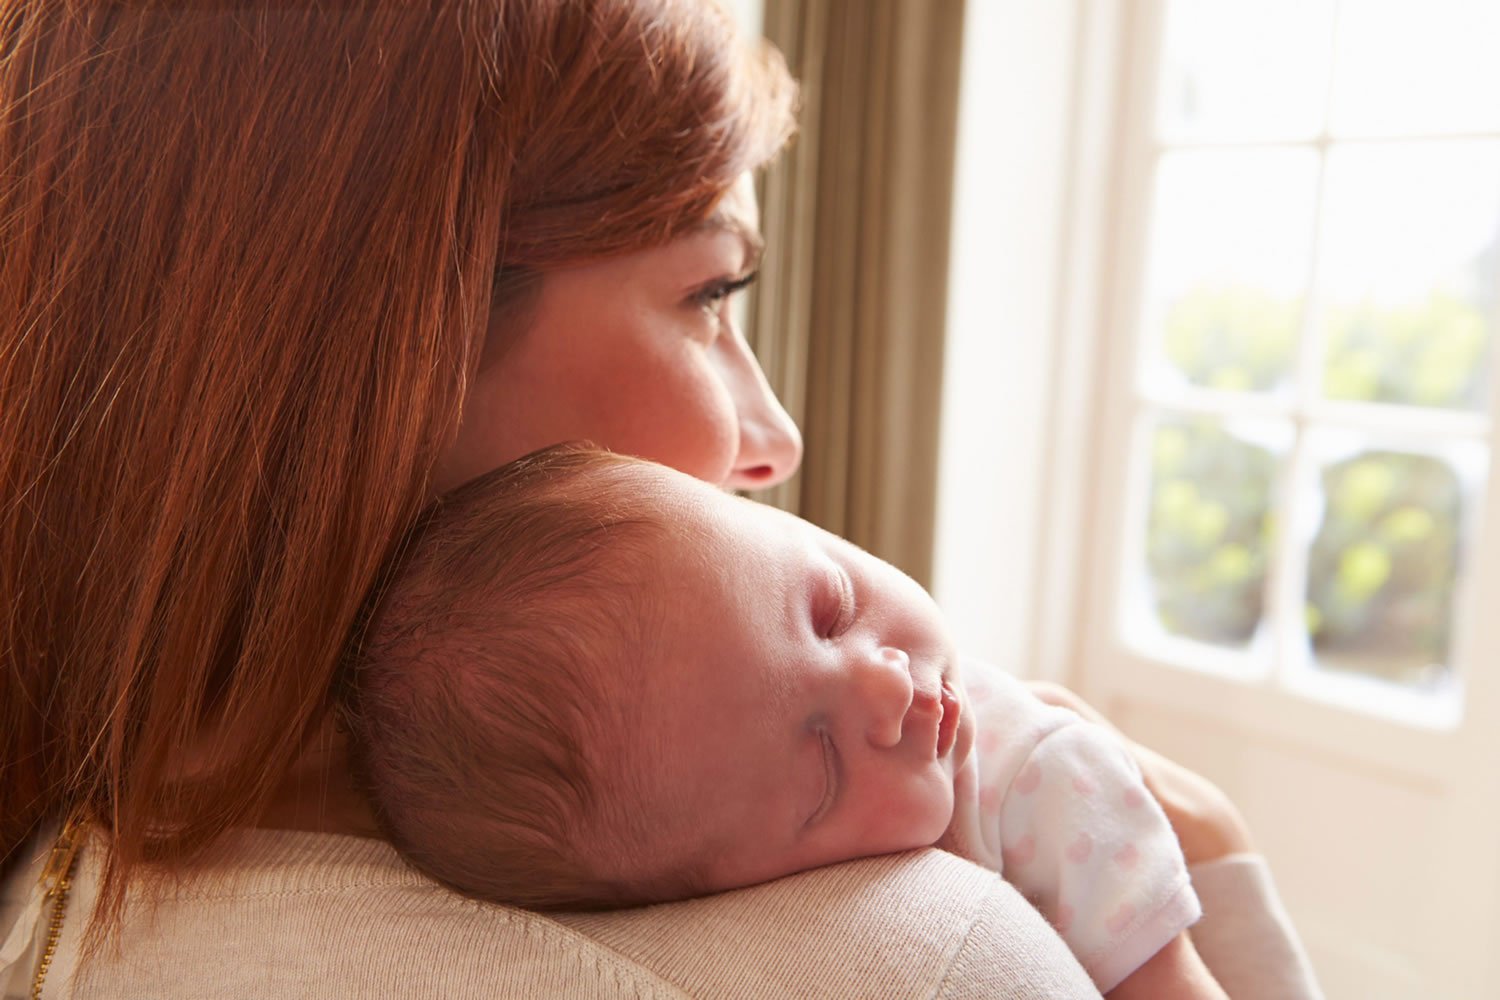 Despite some debate over their safety, home births have become increasingly popular.